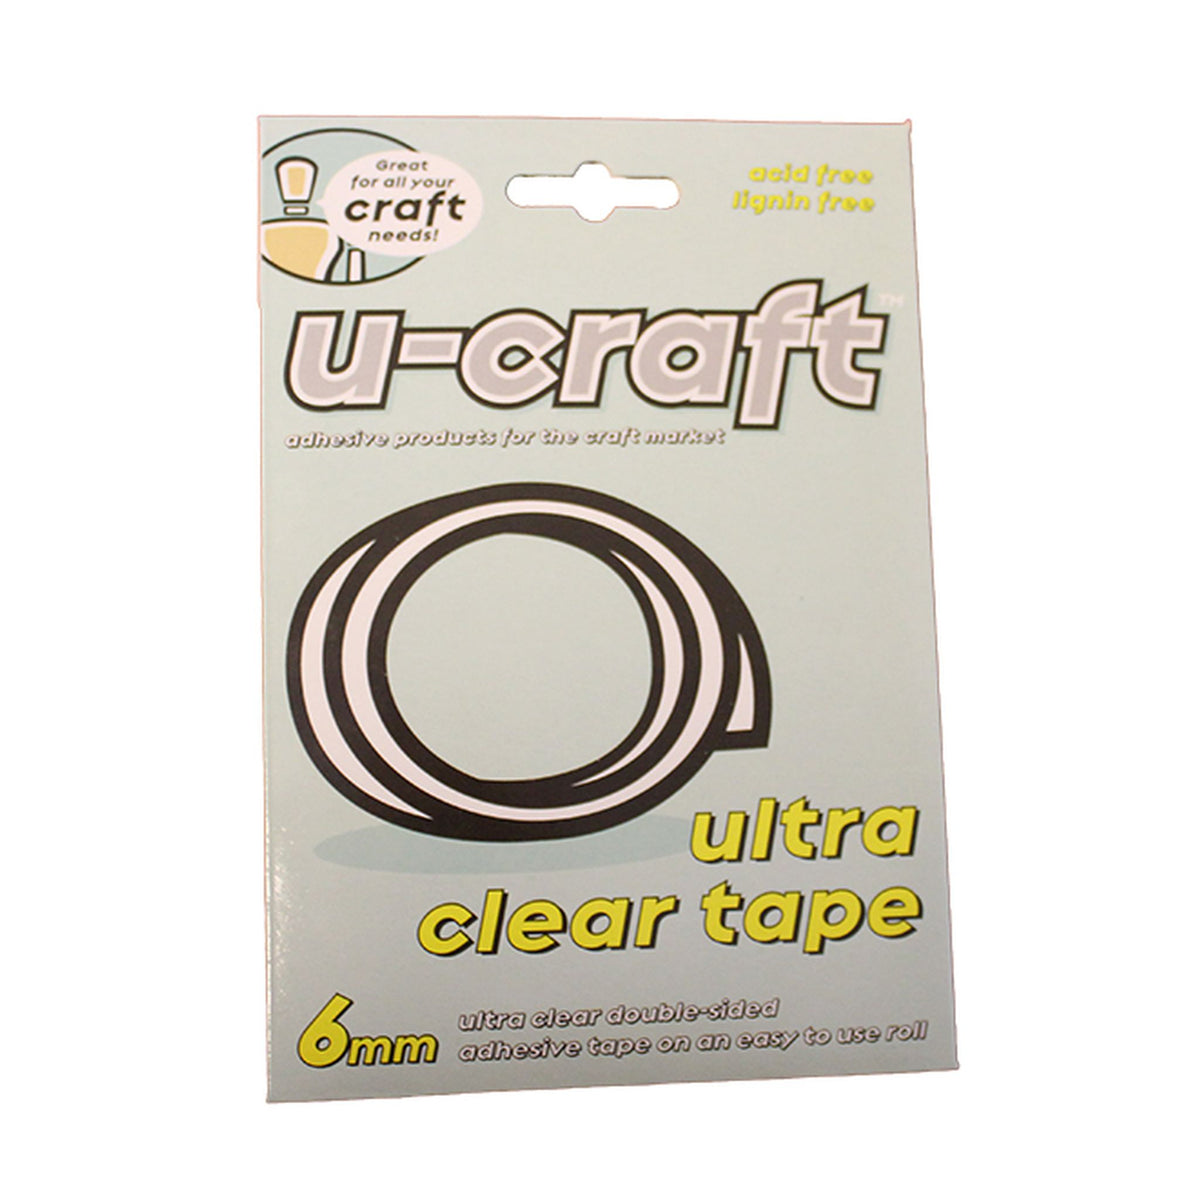 U-Craft Ultra Clear Double Sided Tape 6mm x 5m